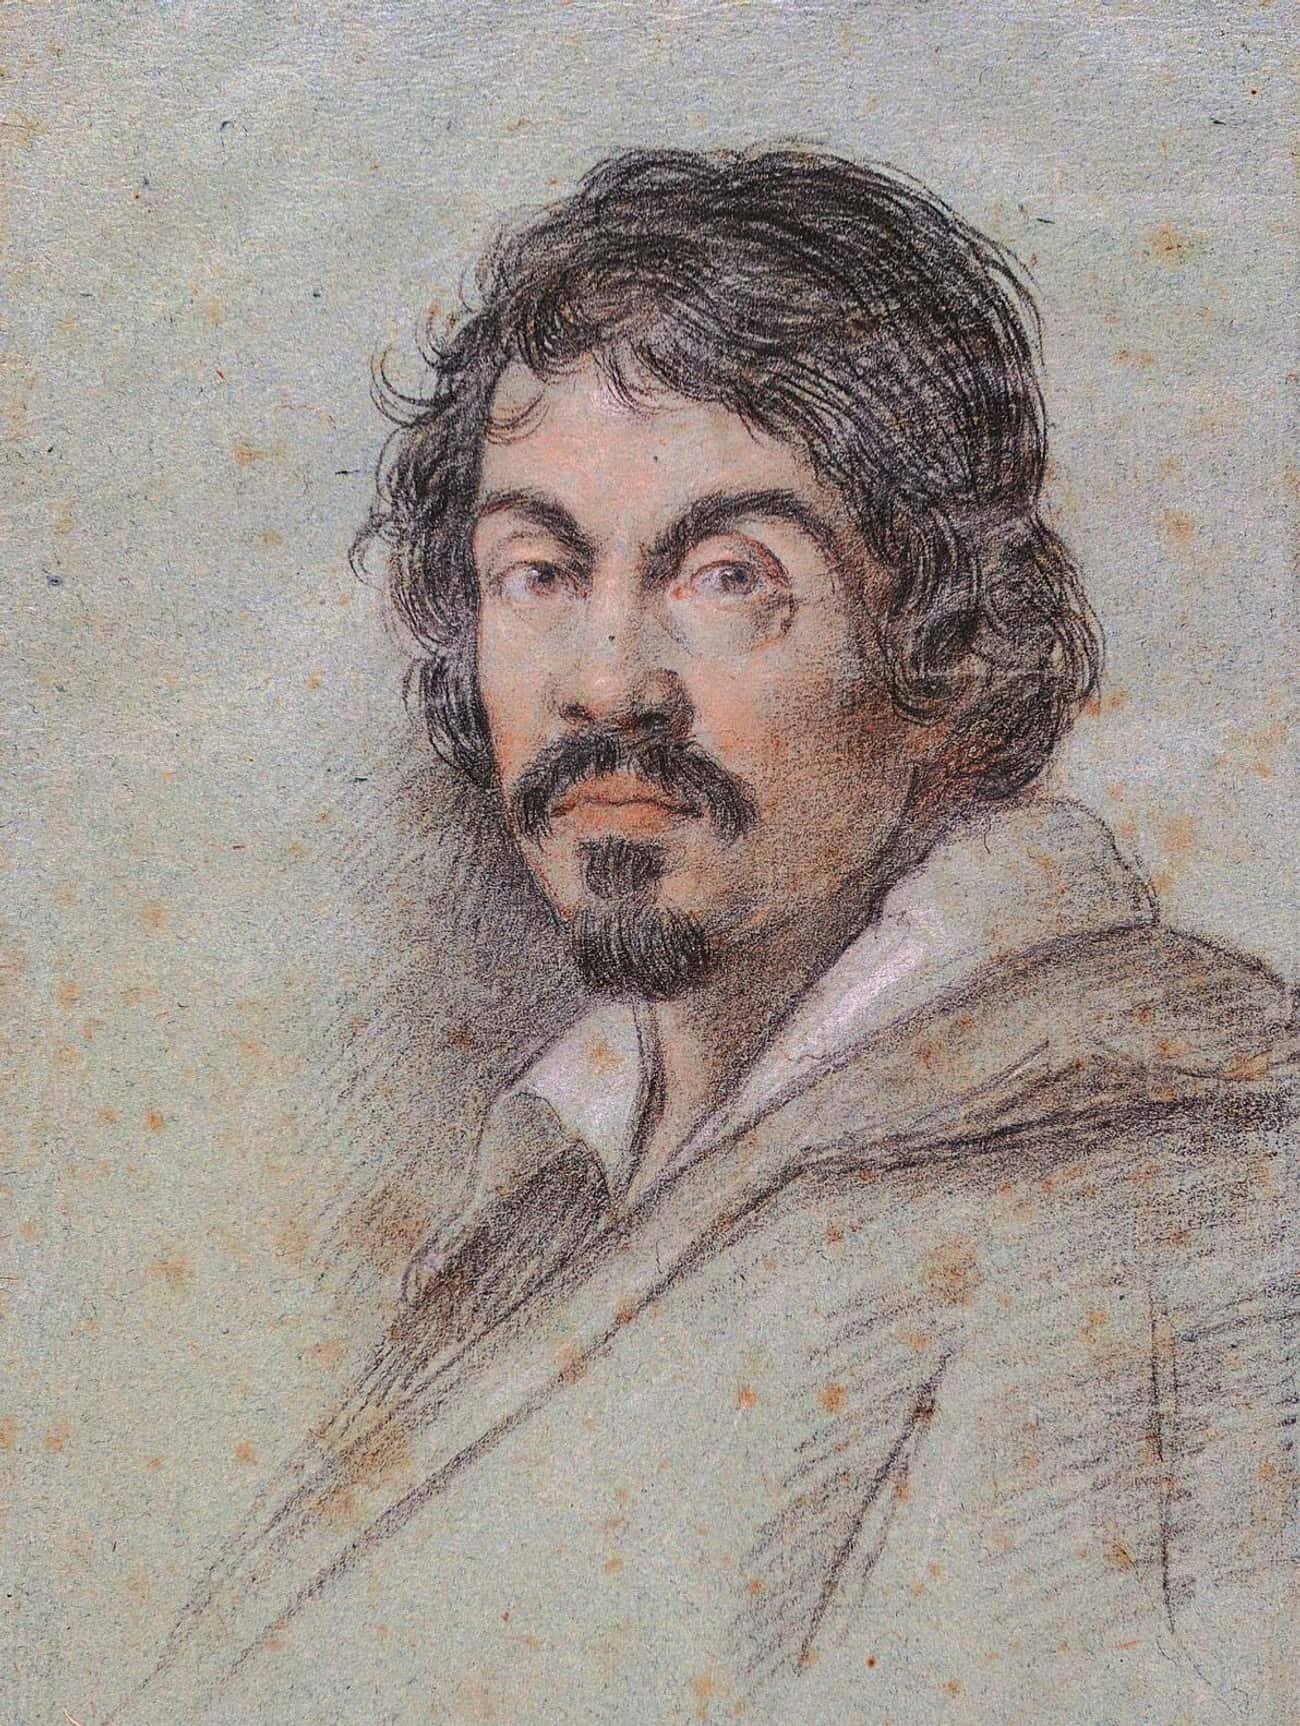 Caravaggio Was Not to Be Messed WIth